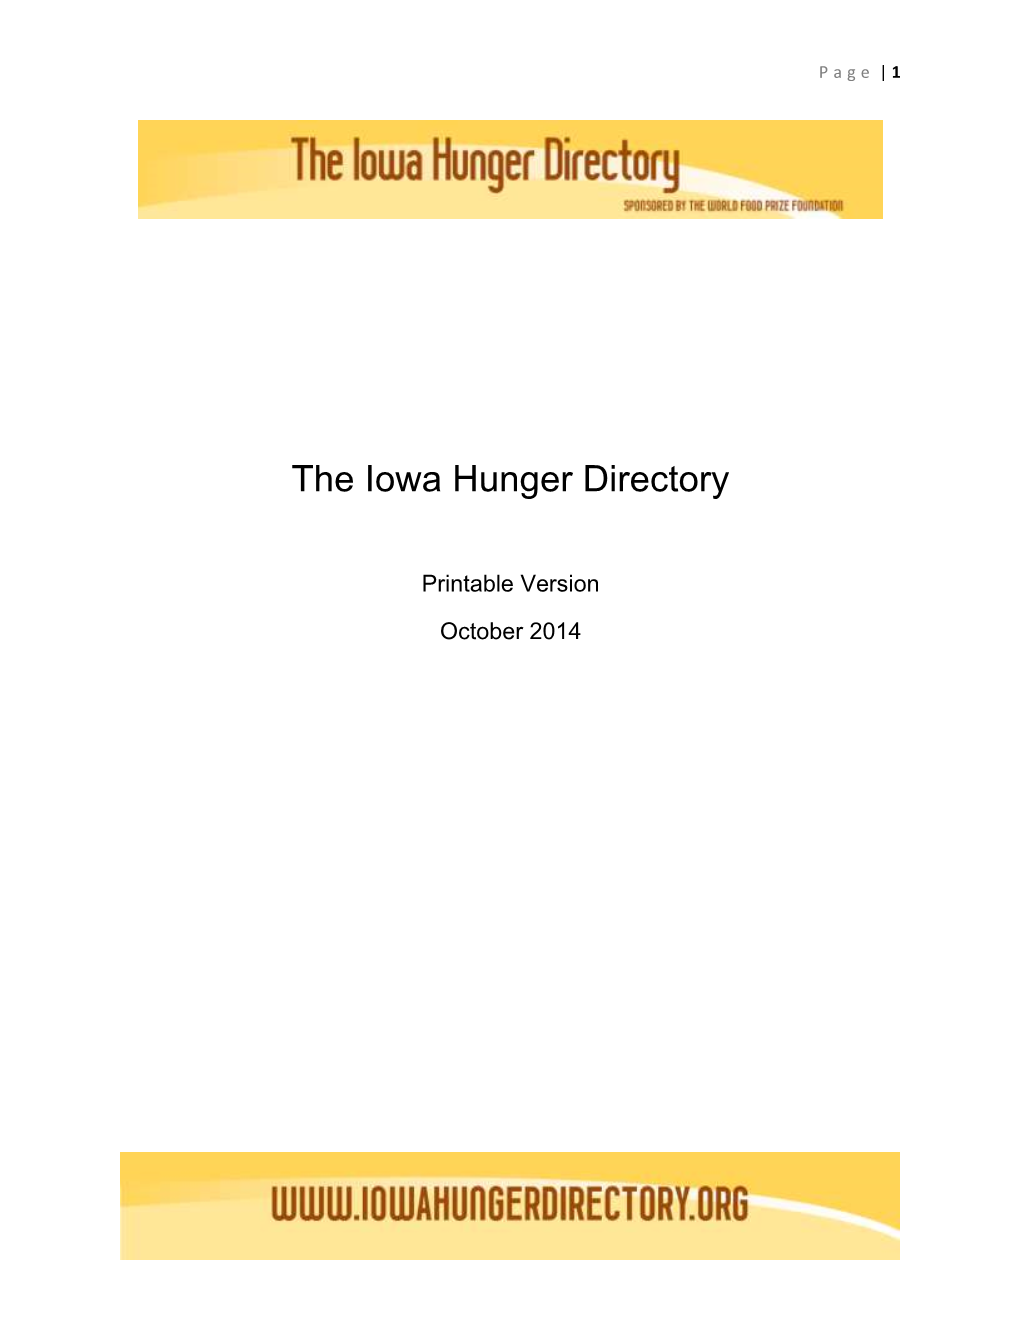 The Iowa Hunger Directory